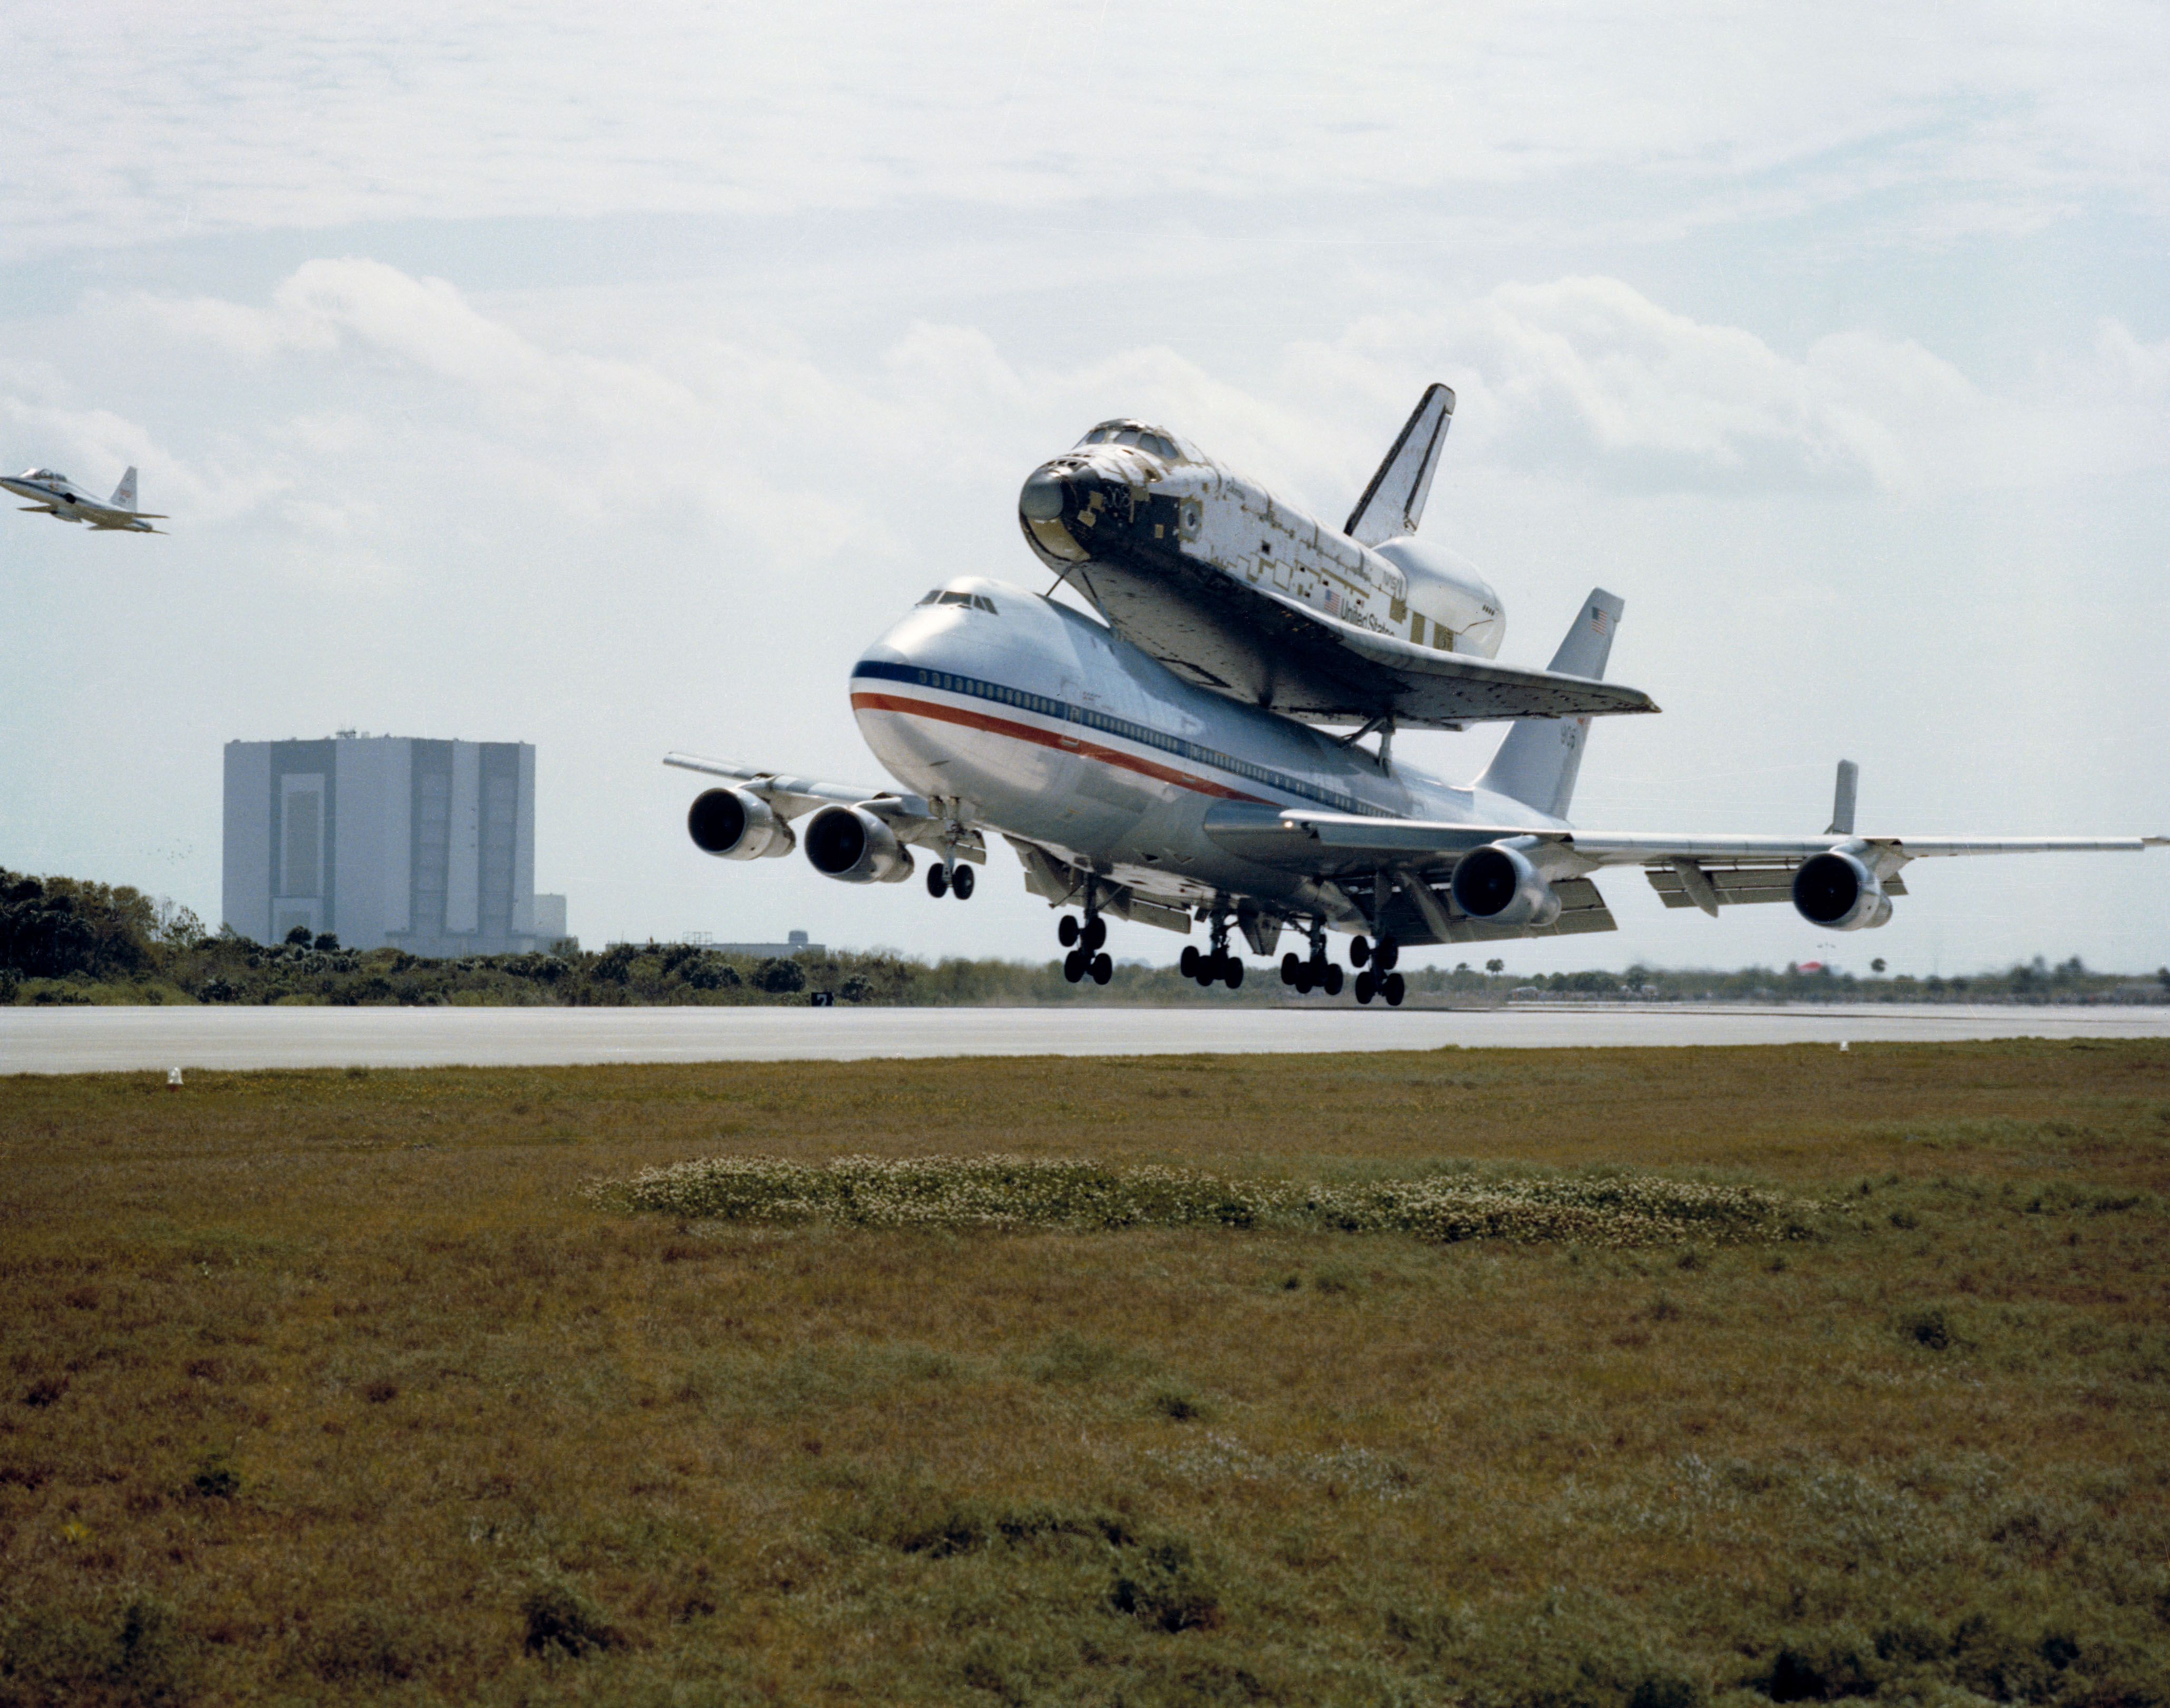 Columbia atop the SCA touches down at KSC’s Shuttle Landing Facility (SLF), with the Vehicle Assembly Building visible in the background